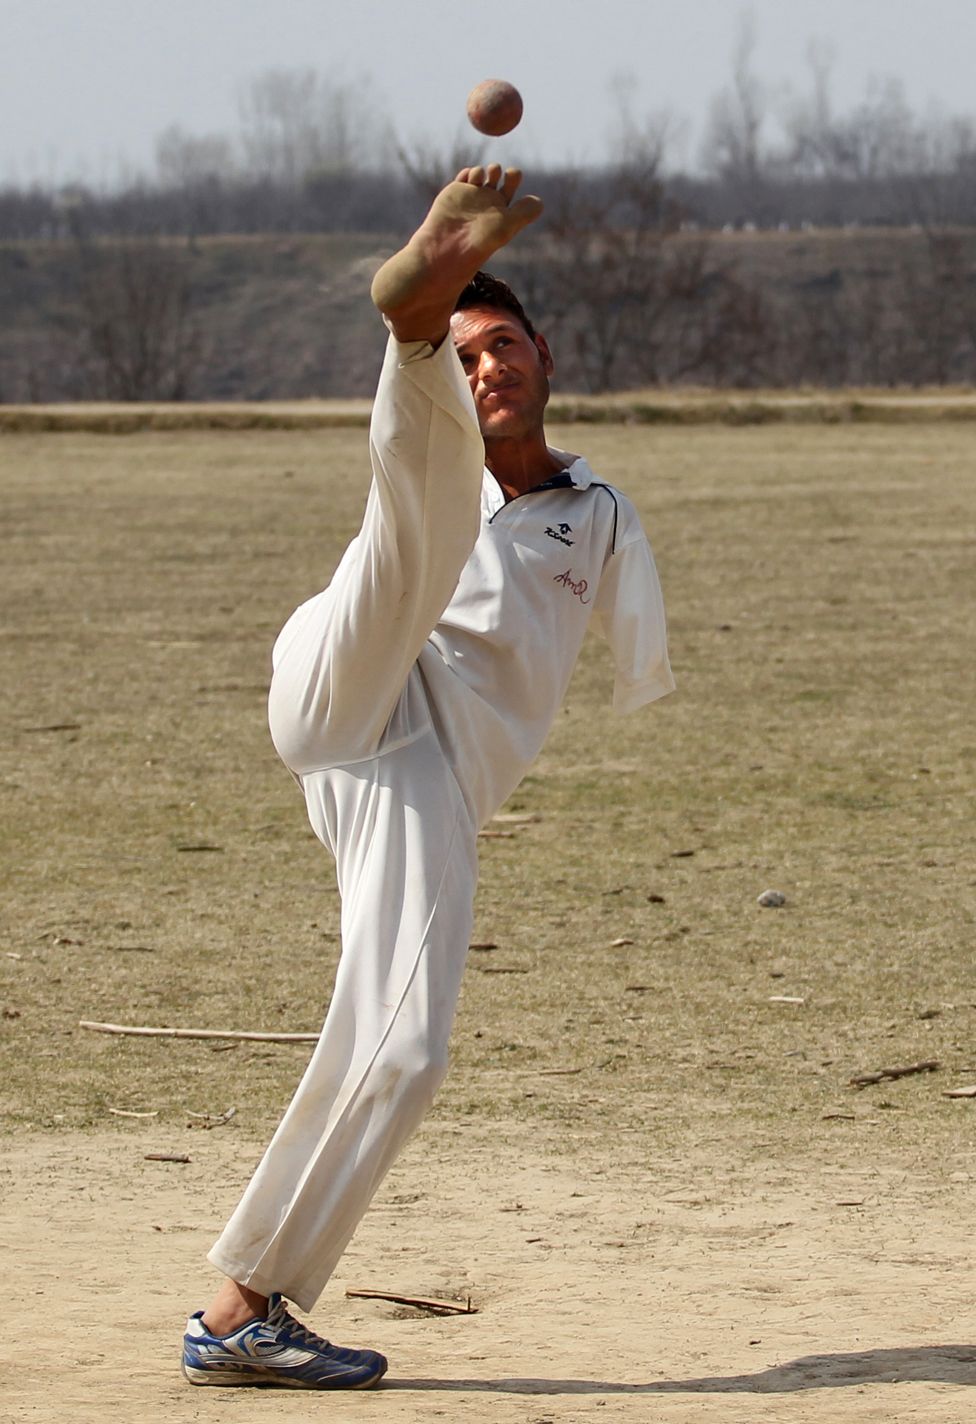 Amir bowls with his foot